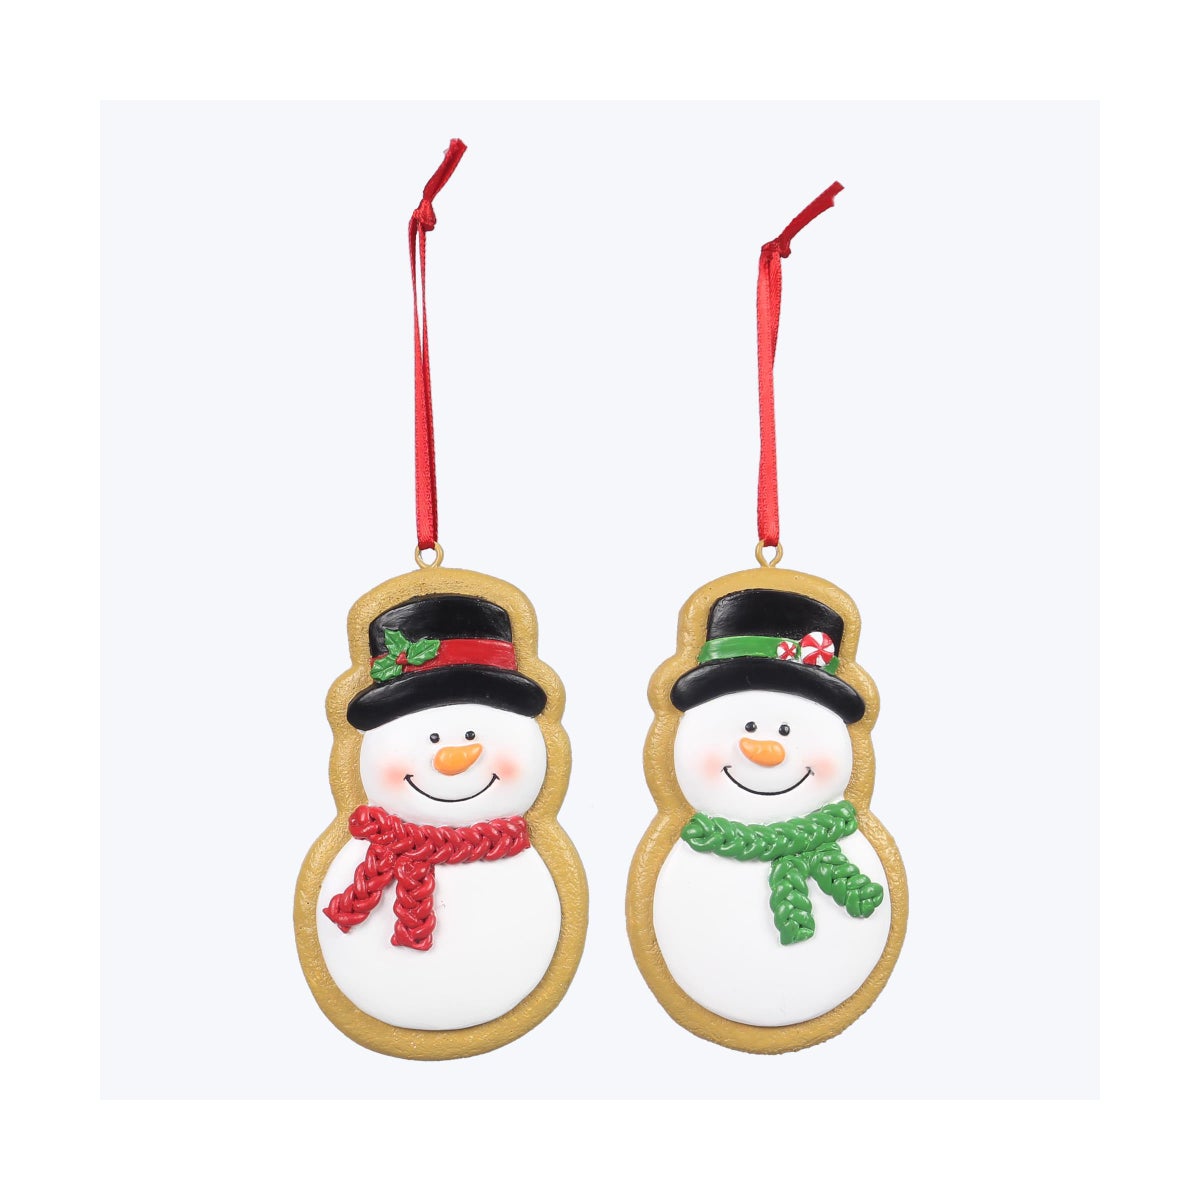 Resin Cocoa and Cookies Snowman Christmas Ornaments, 2 Ast